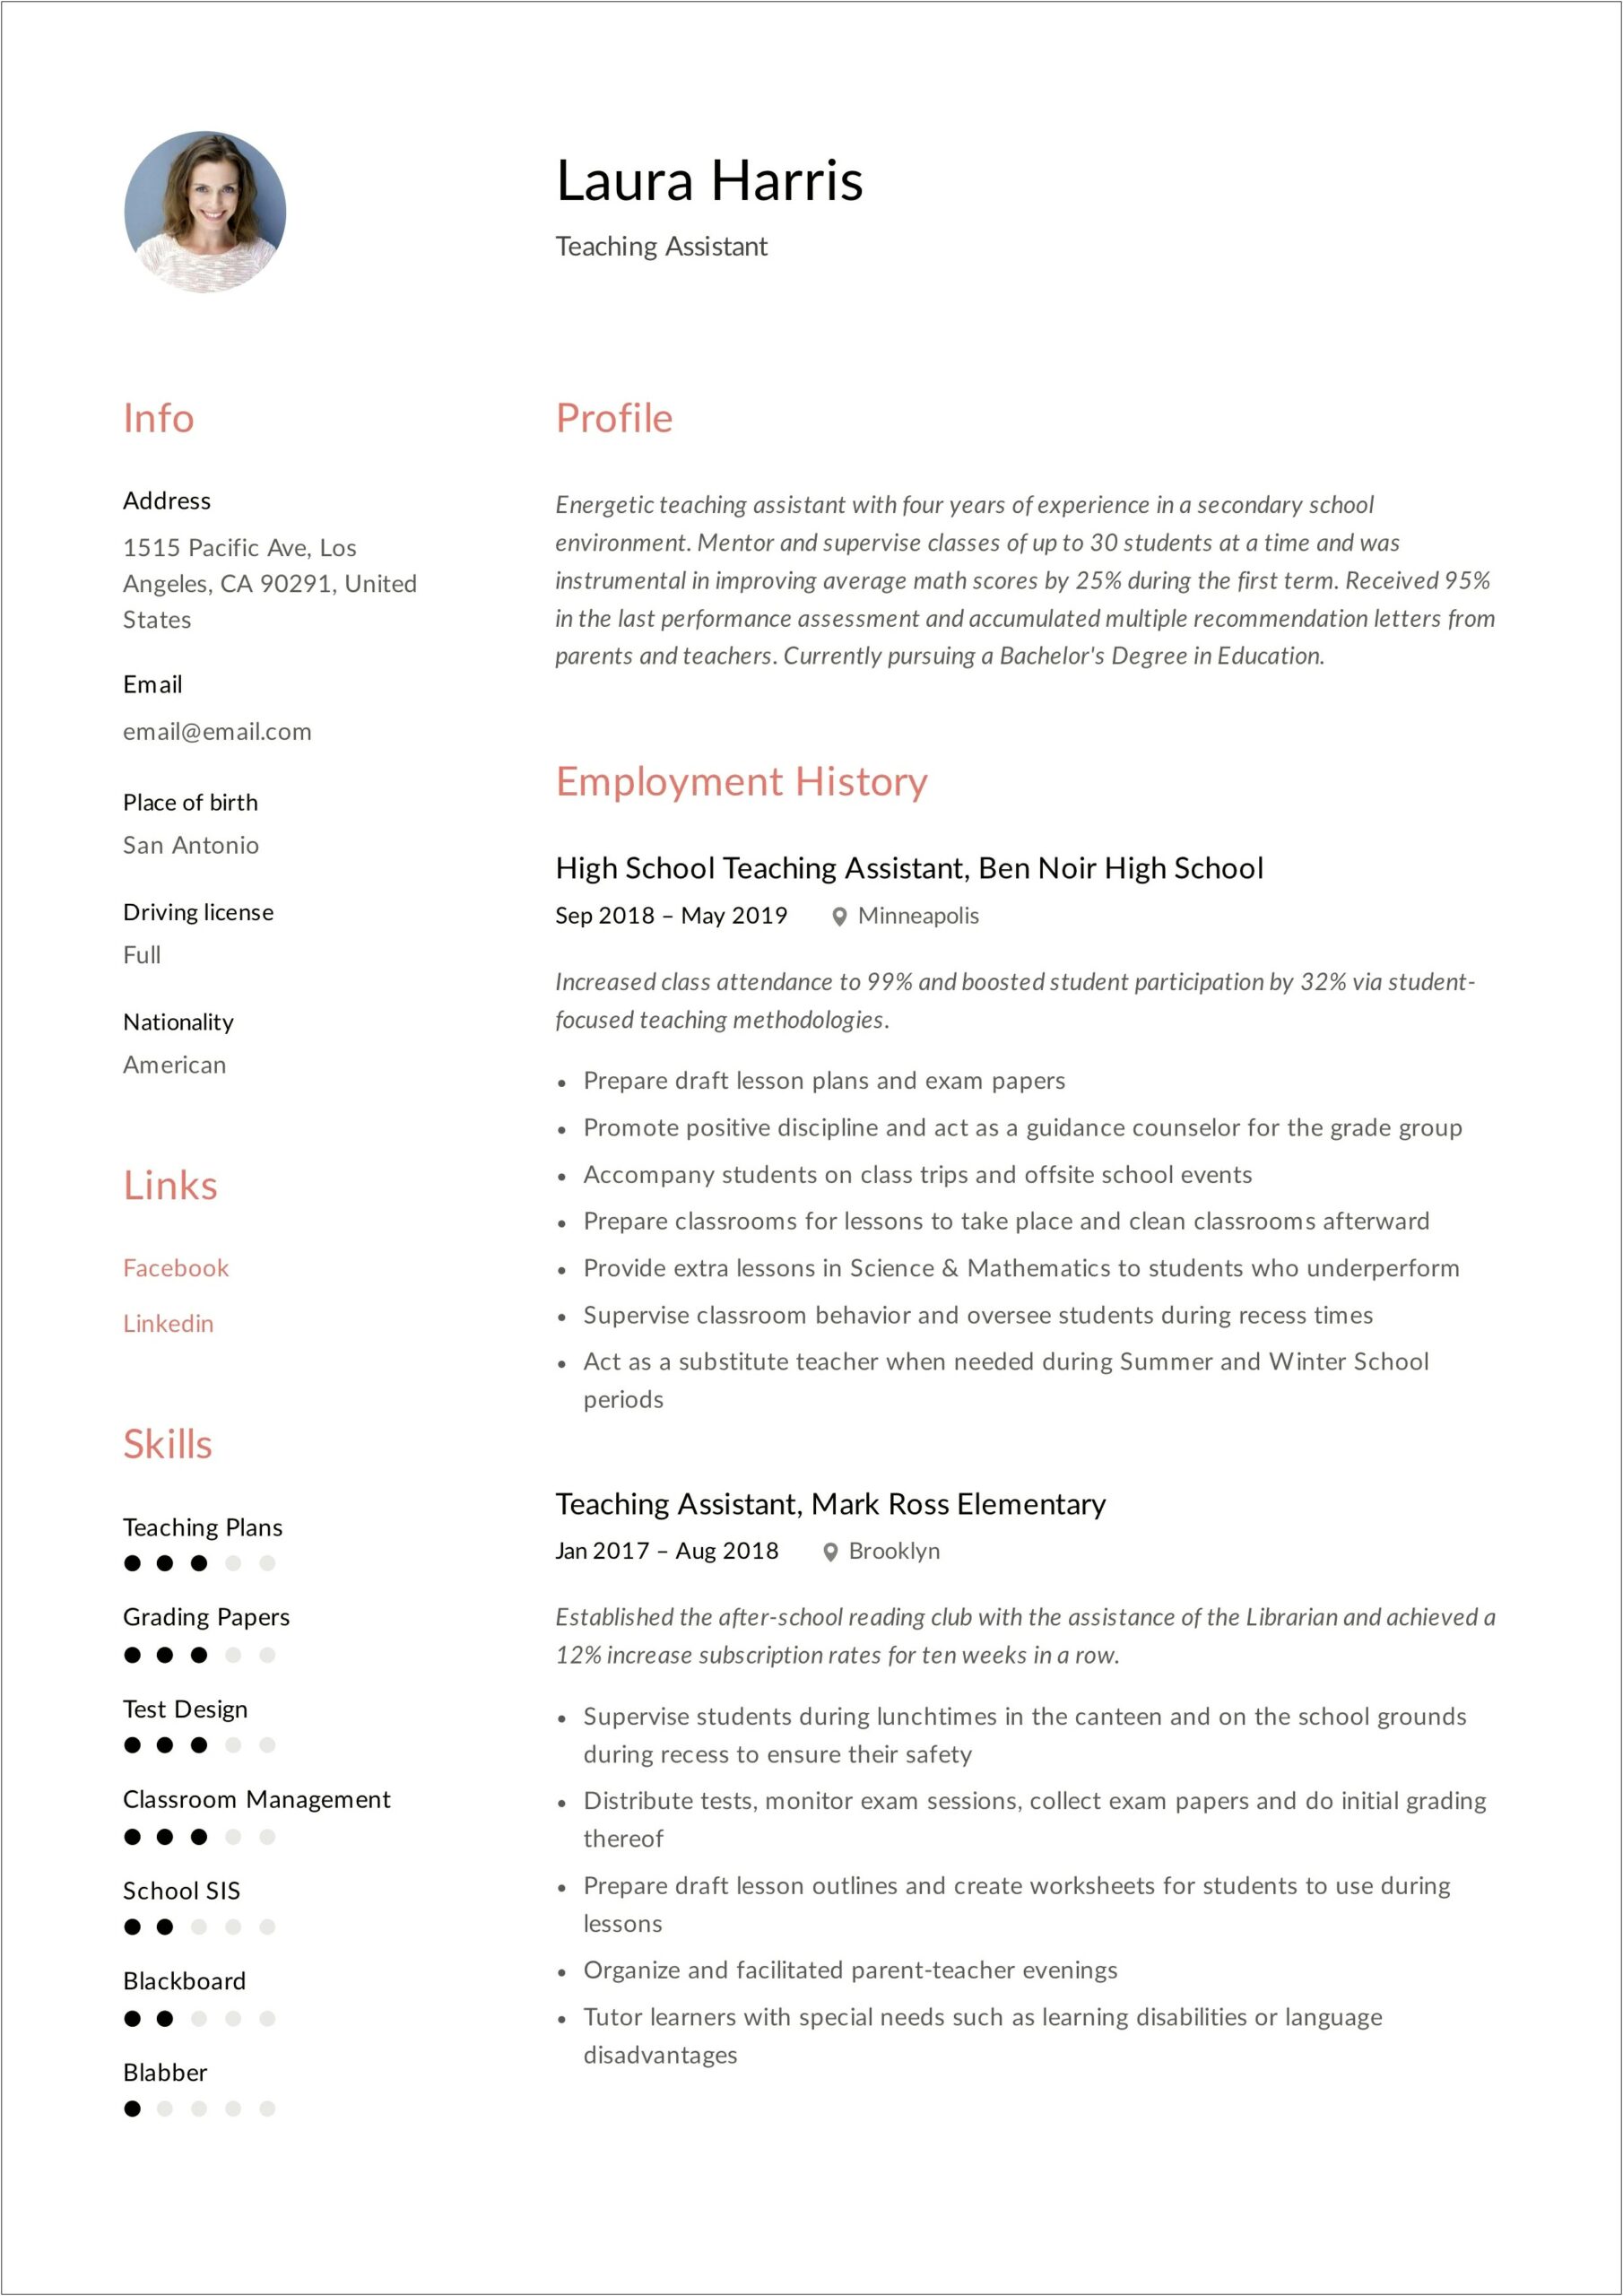 Sample Resumes For Teaching Assistant Positions